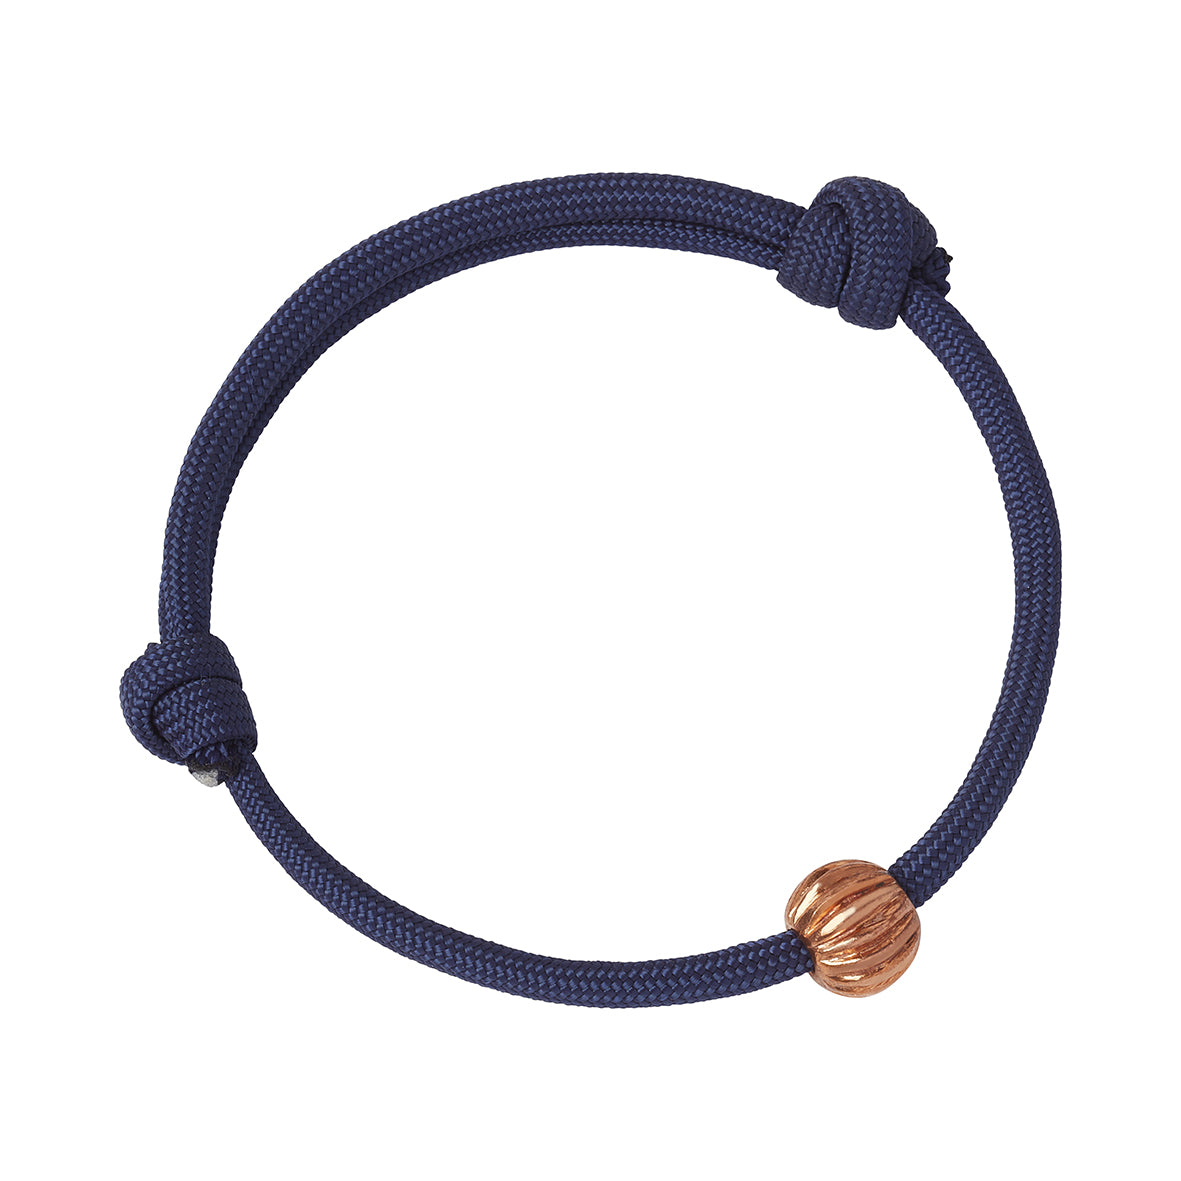 A navy blue adjustable paracord bracelet with a copper round bead with a grooved pattern inspired by the Roman Melon Beads found at Corstopitum in Corbridge, Northumberland. Made by Kirsty Taylor Jewellery